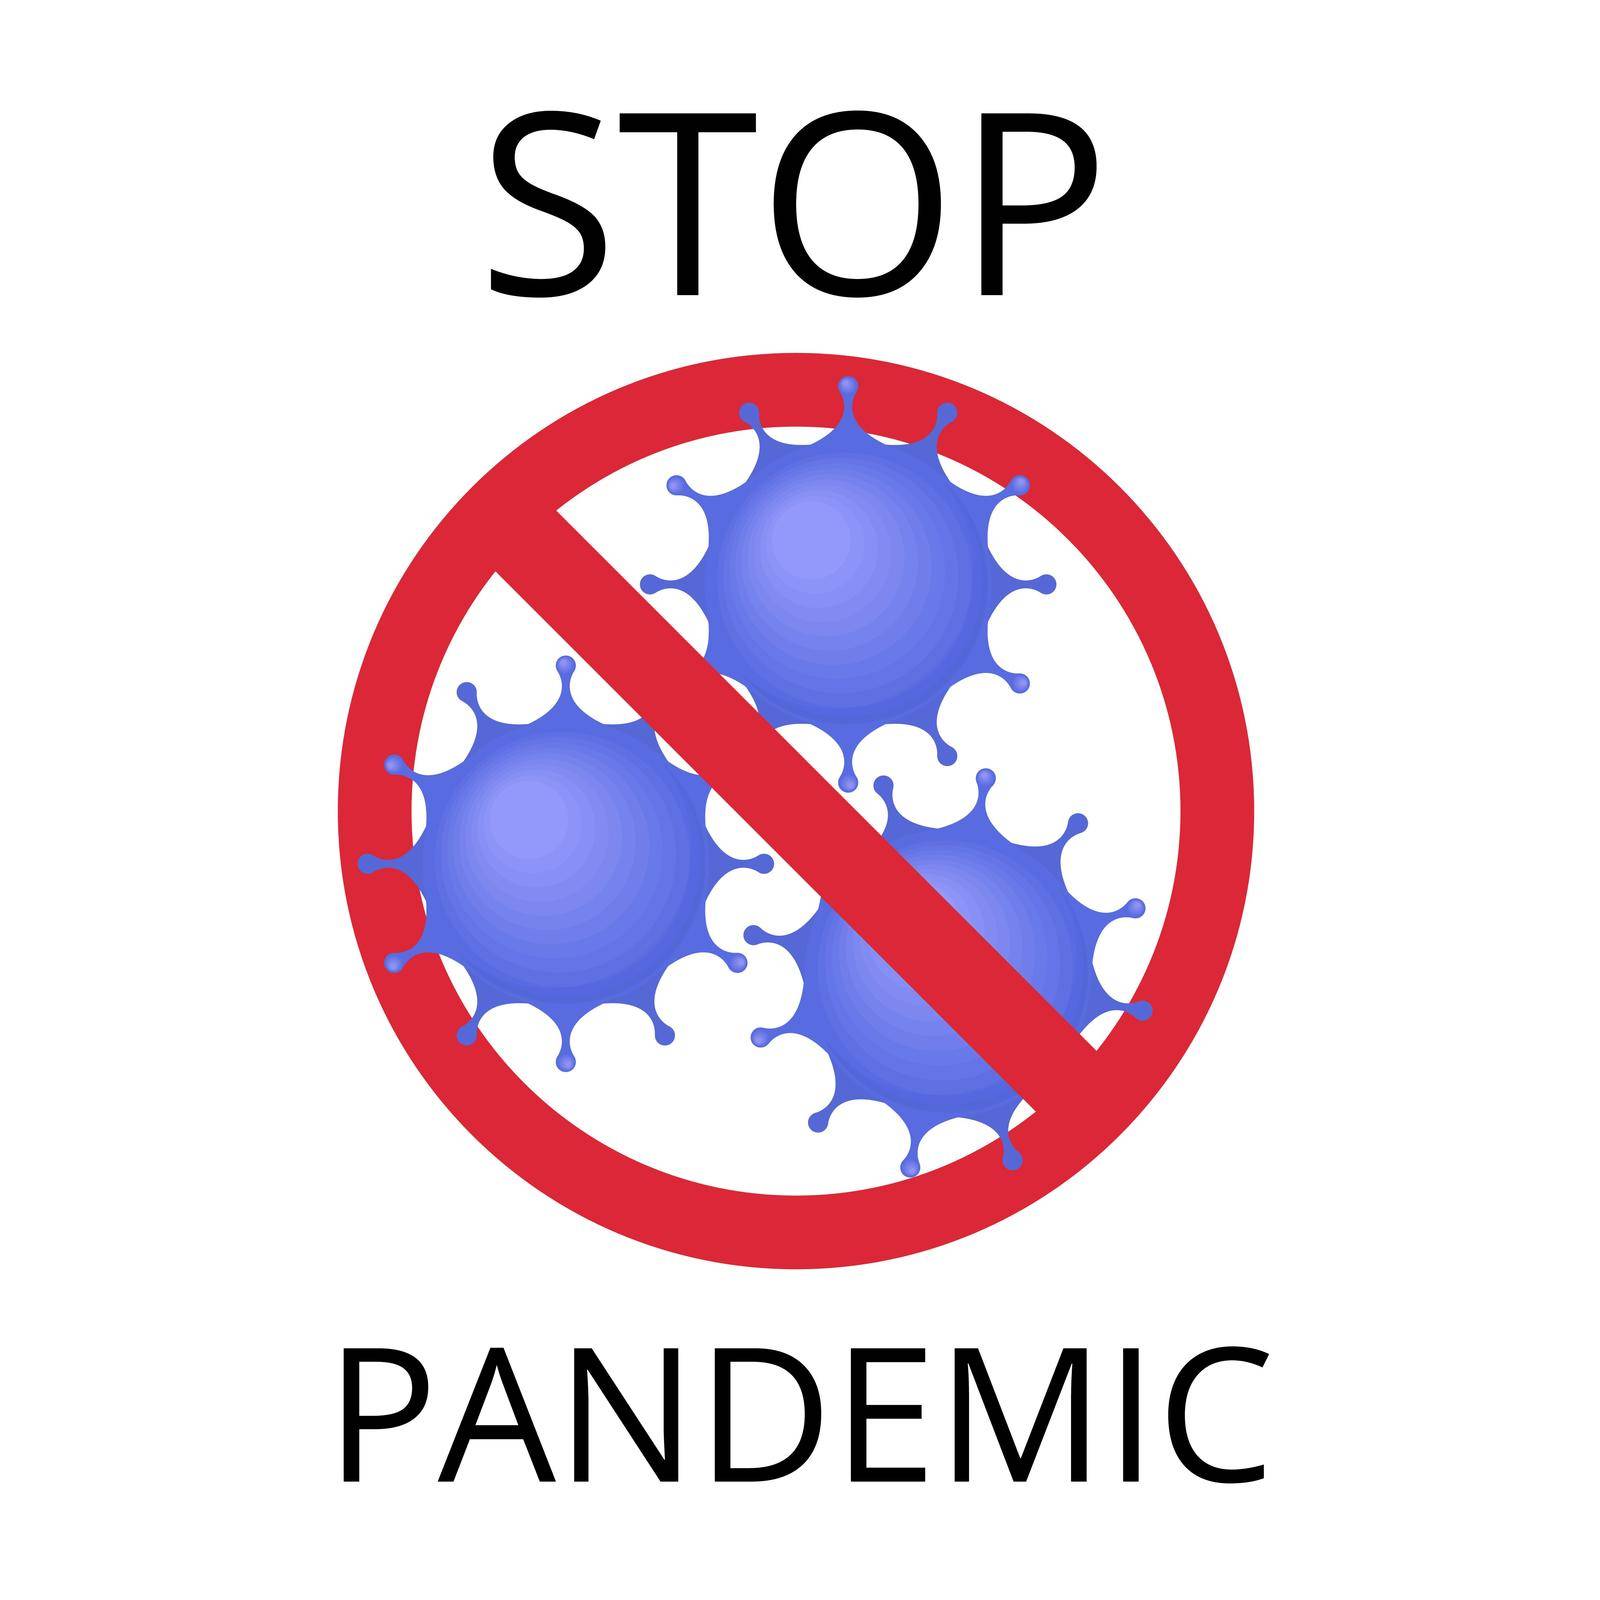 Stop pandemic warning. nCov 2019 concept.Coronavirus, pandemic concept. Can be used as flyer, banner or print. Flat cartoon illustration isolated on white background in cartoon style. by Daaridna